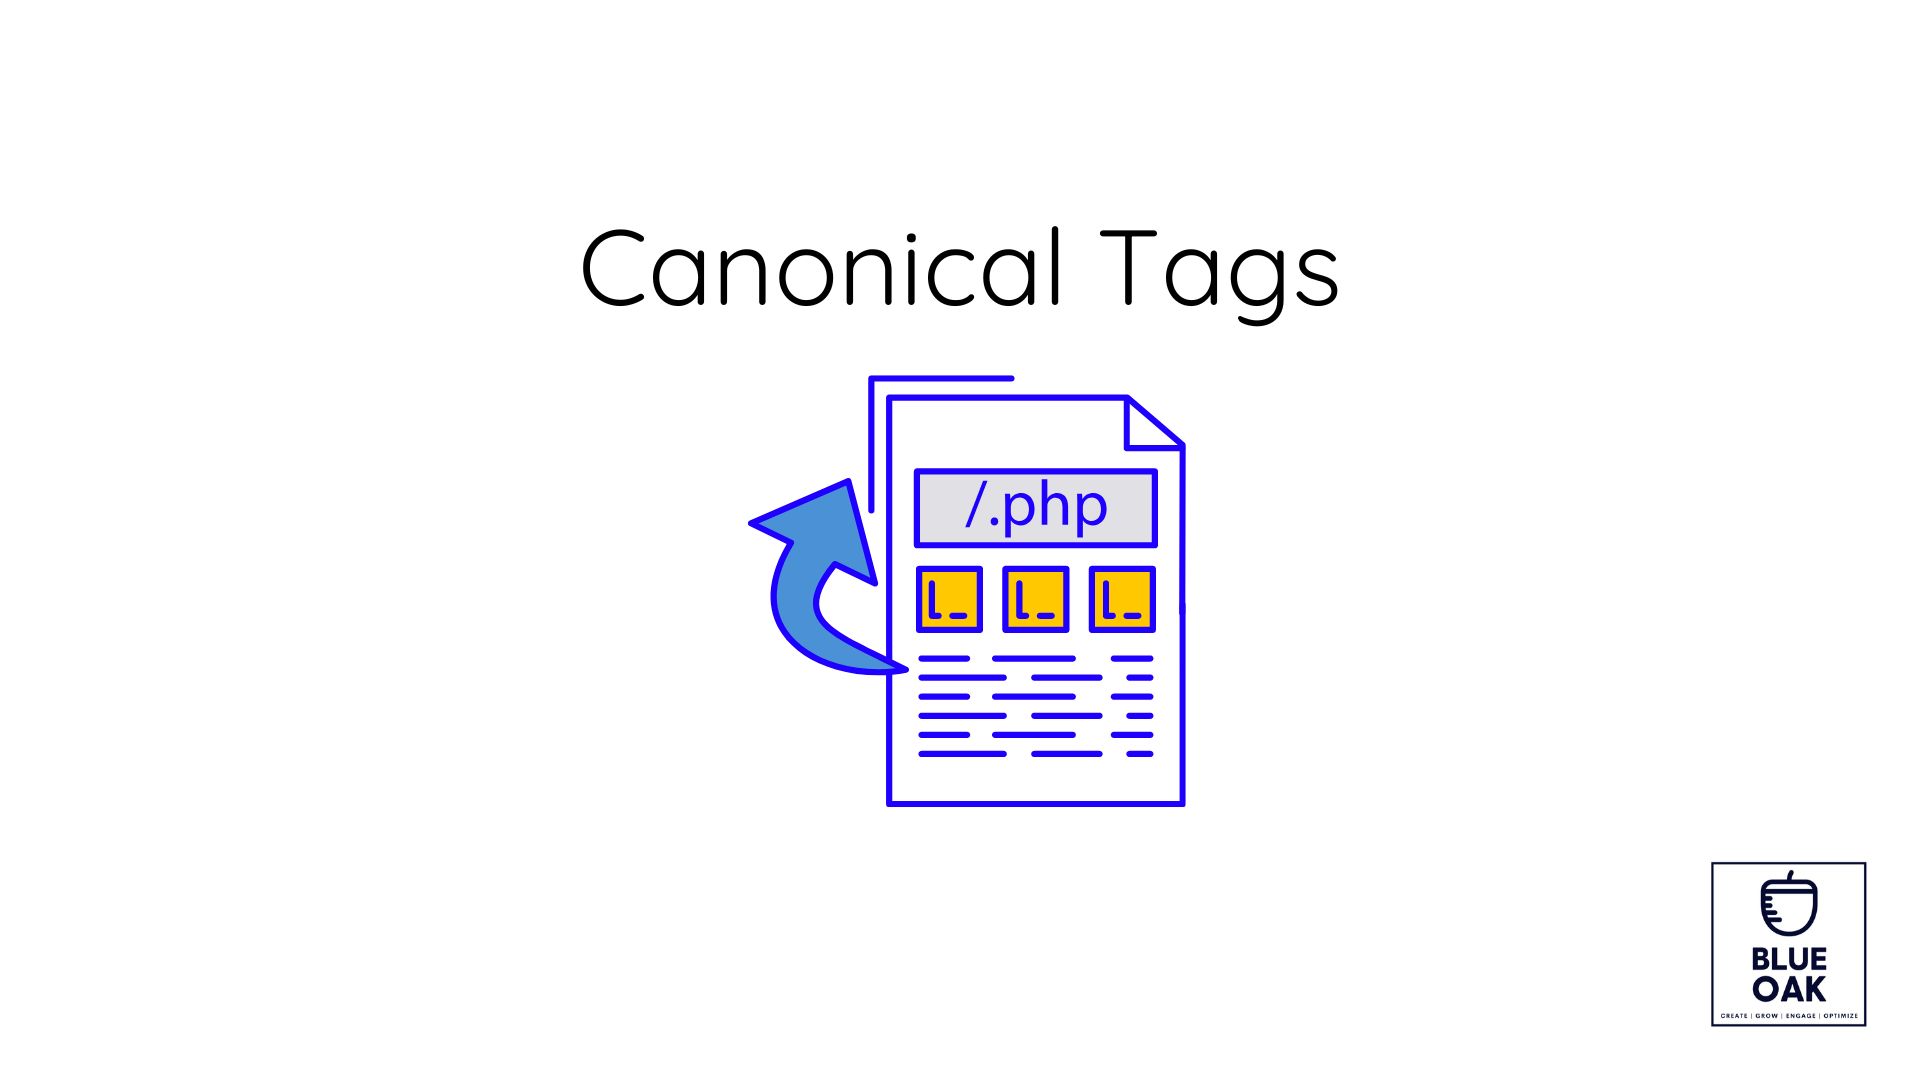 What are Canonical Tags?